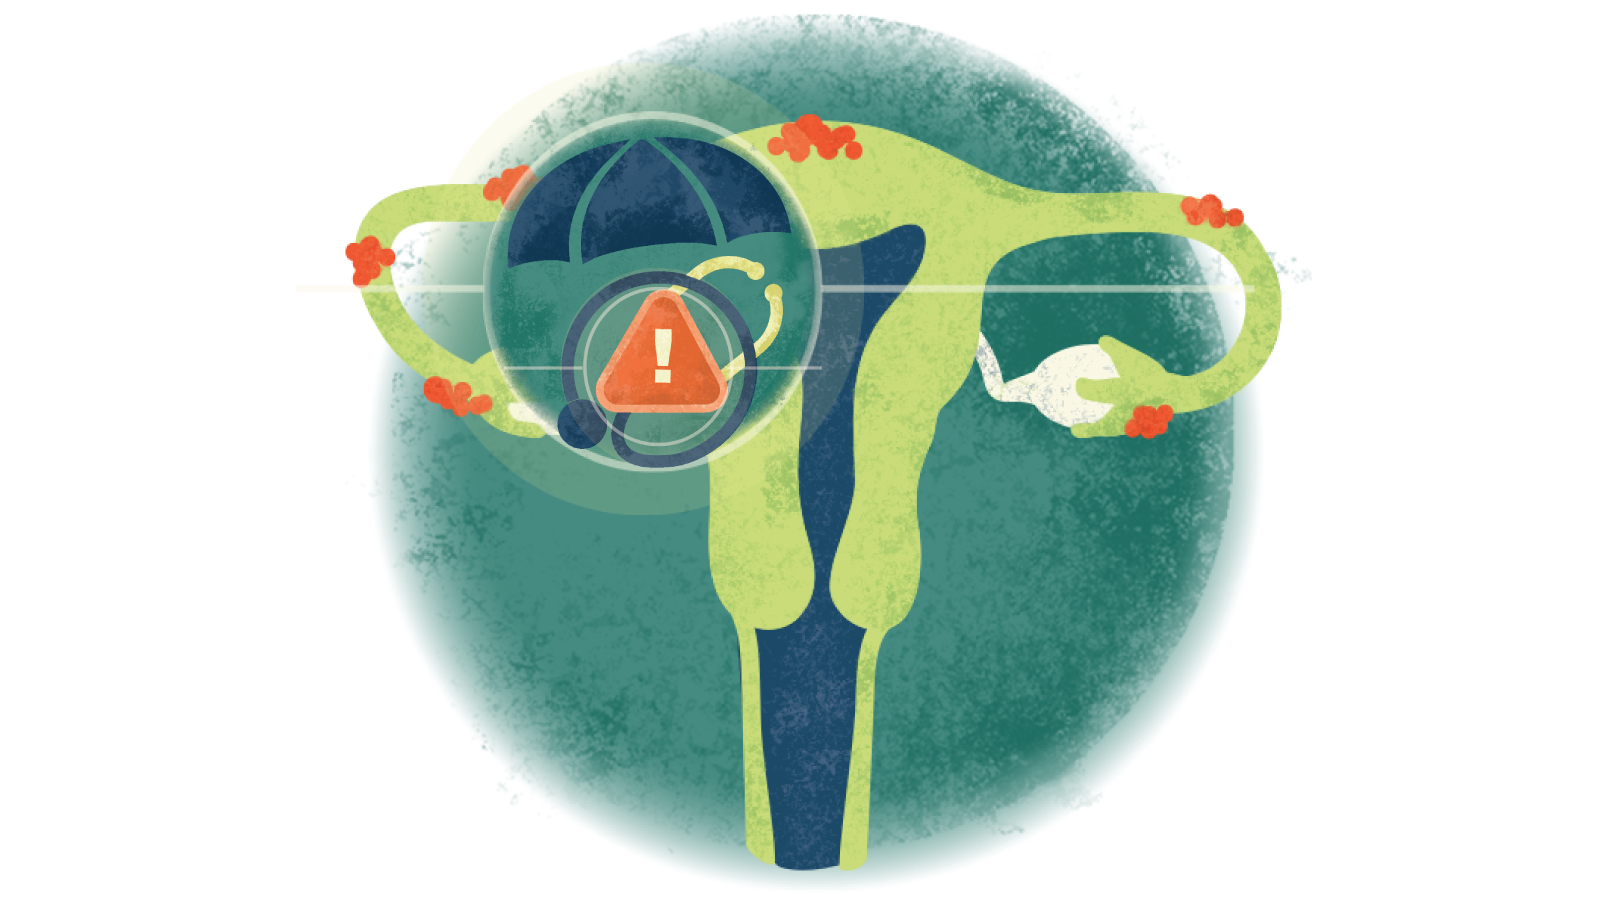 Illustration of an exclamation point in a triangle over a stethoscope in a circle over a uterus with endometriosis